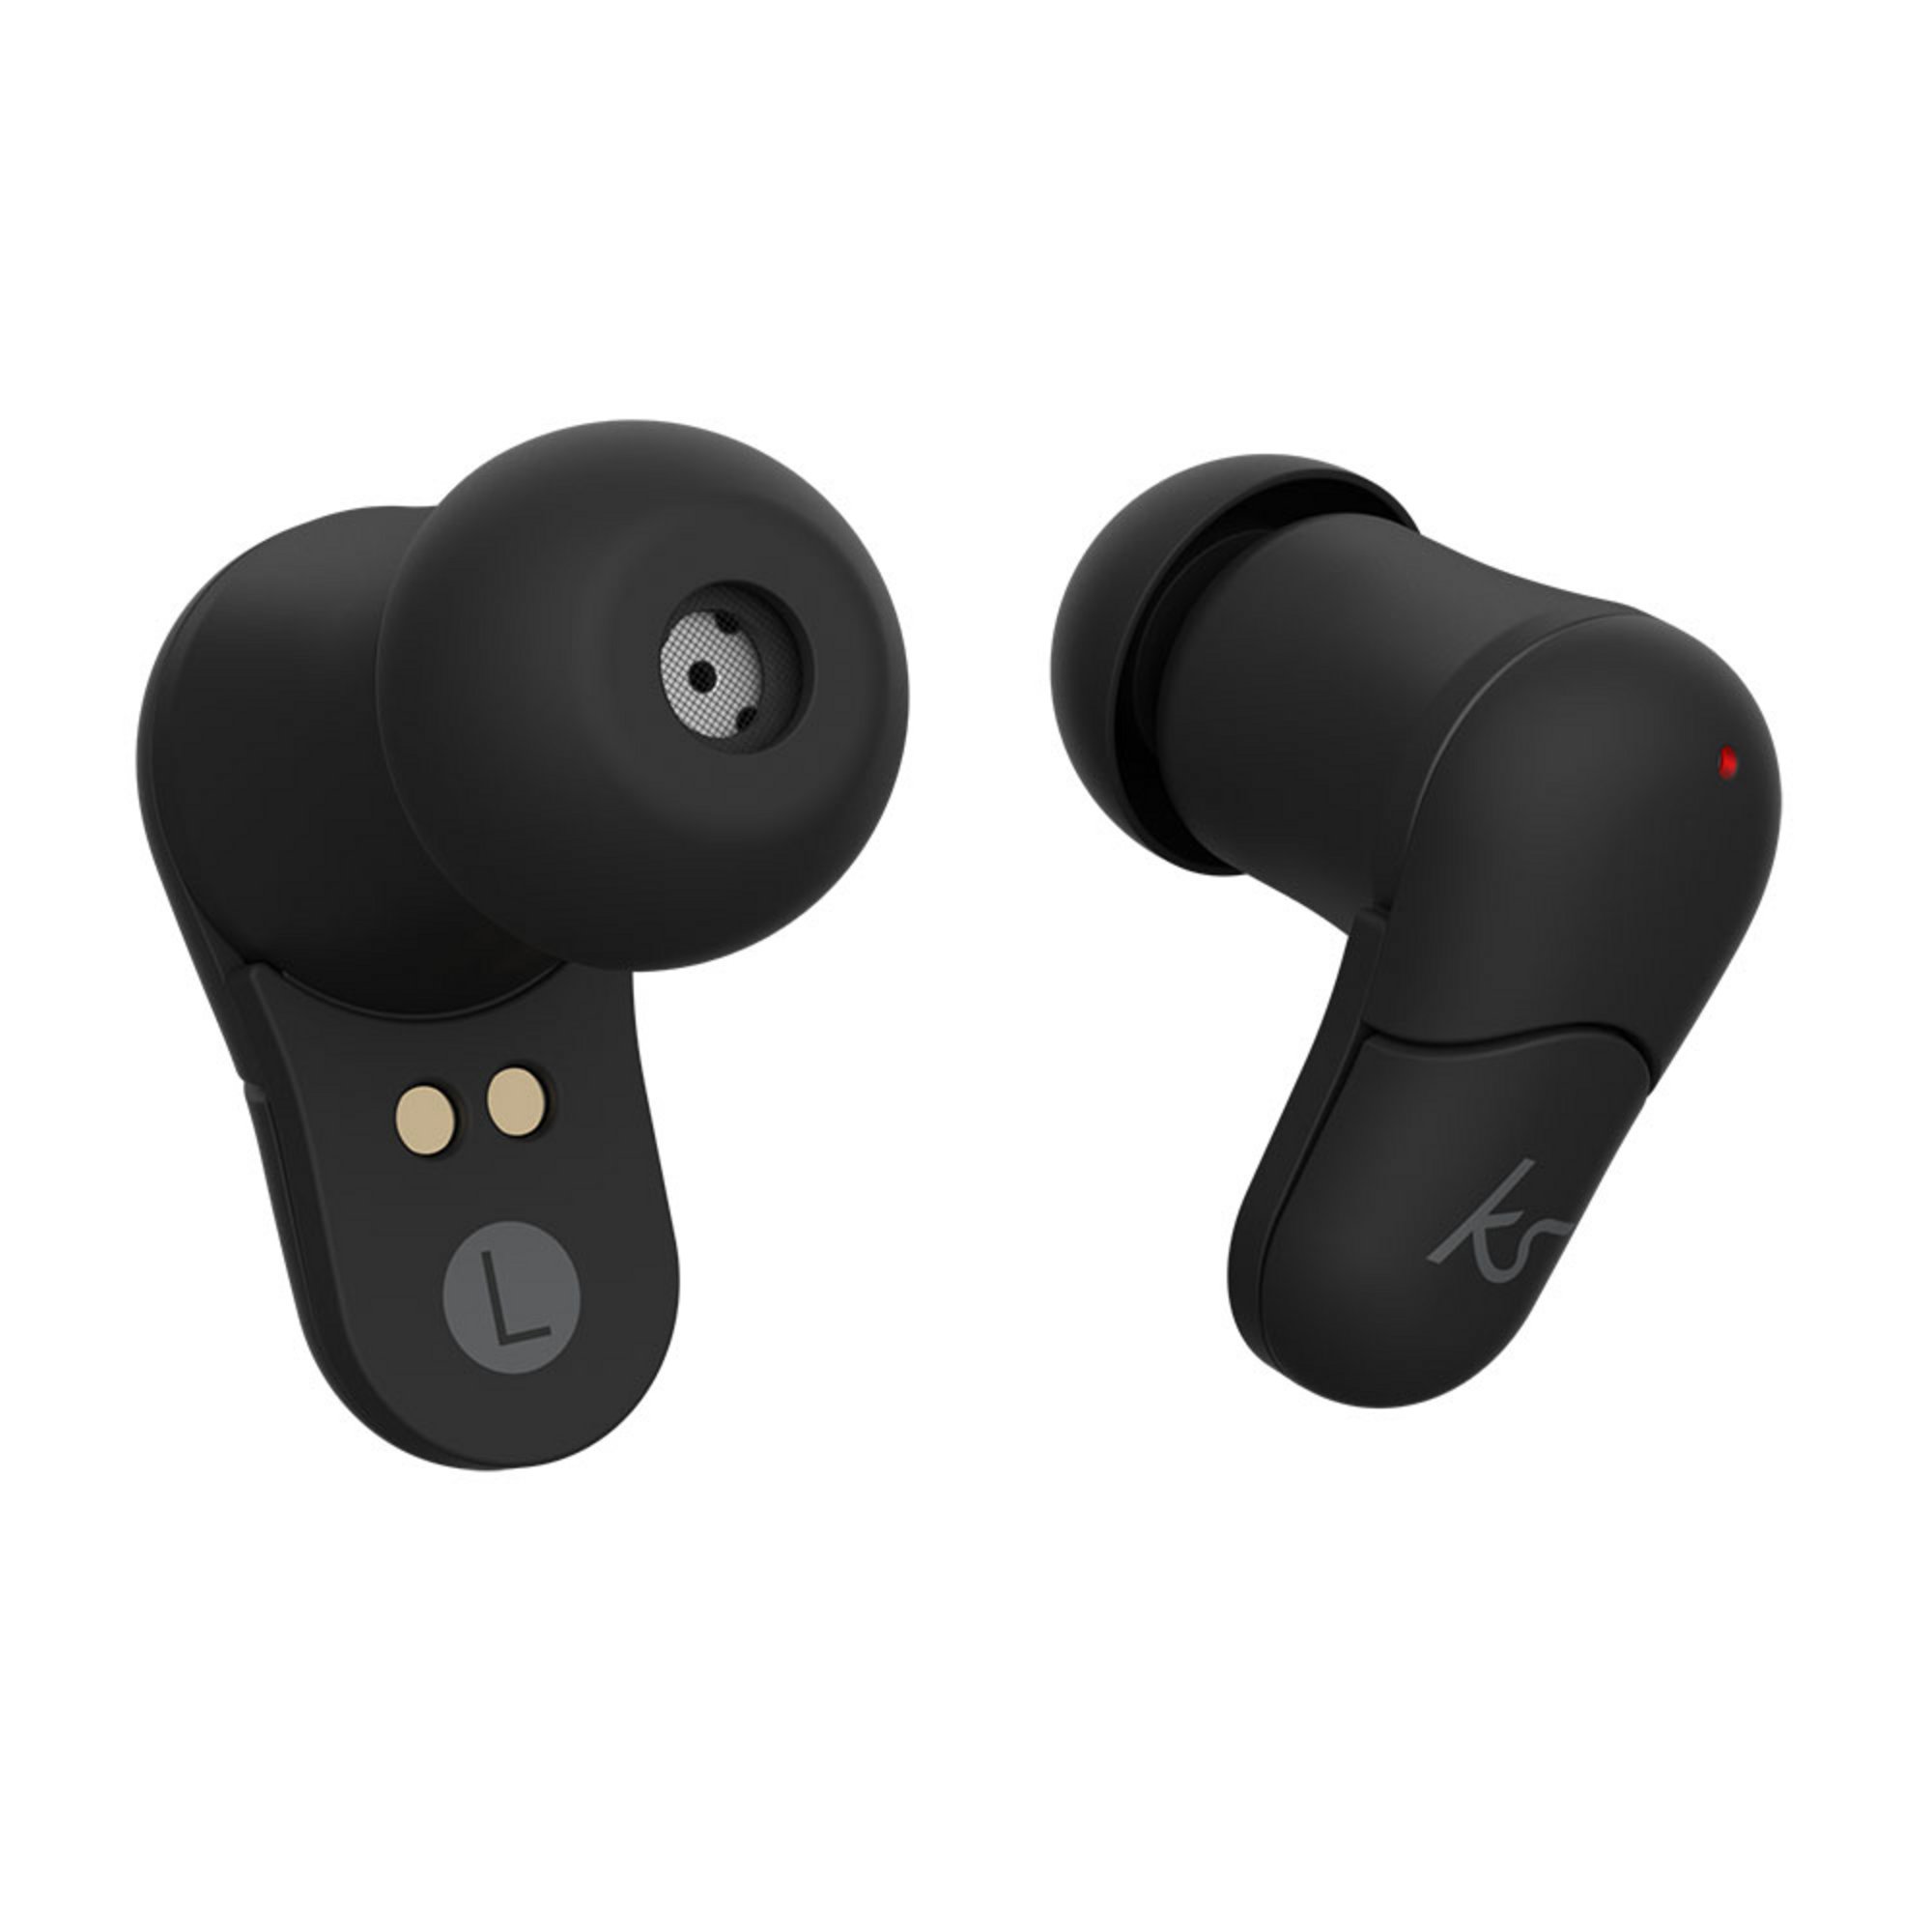 View more Mini Wireless Earbuds Black details!!